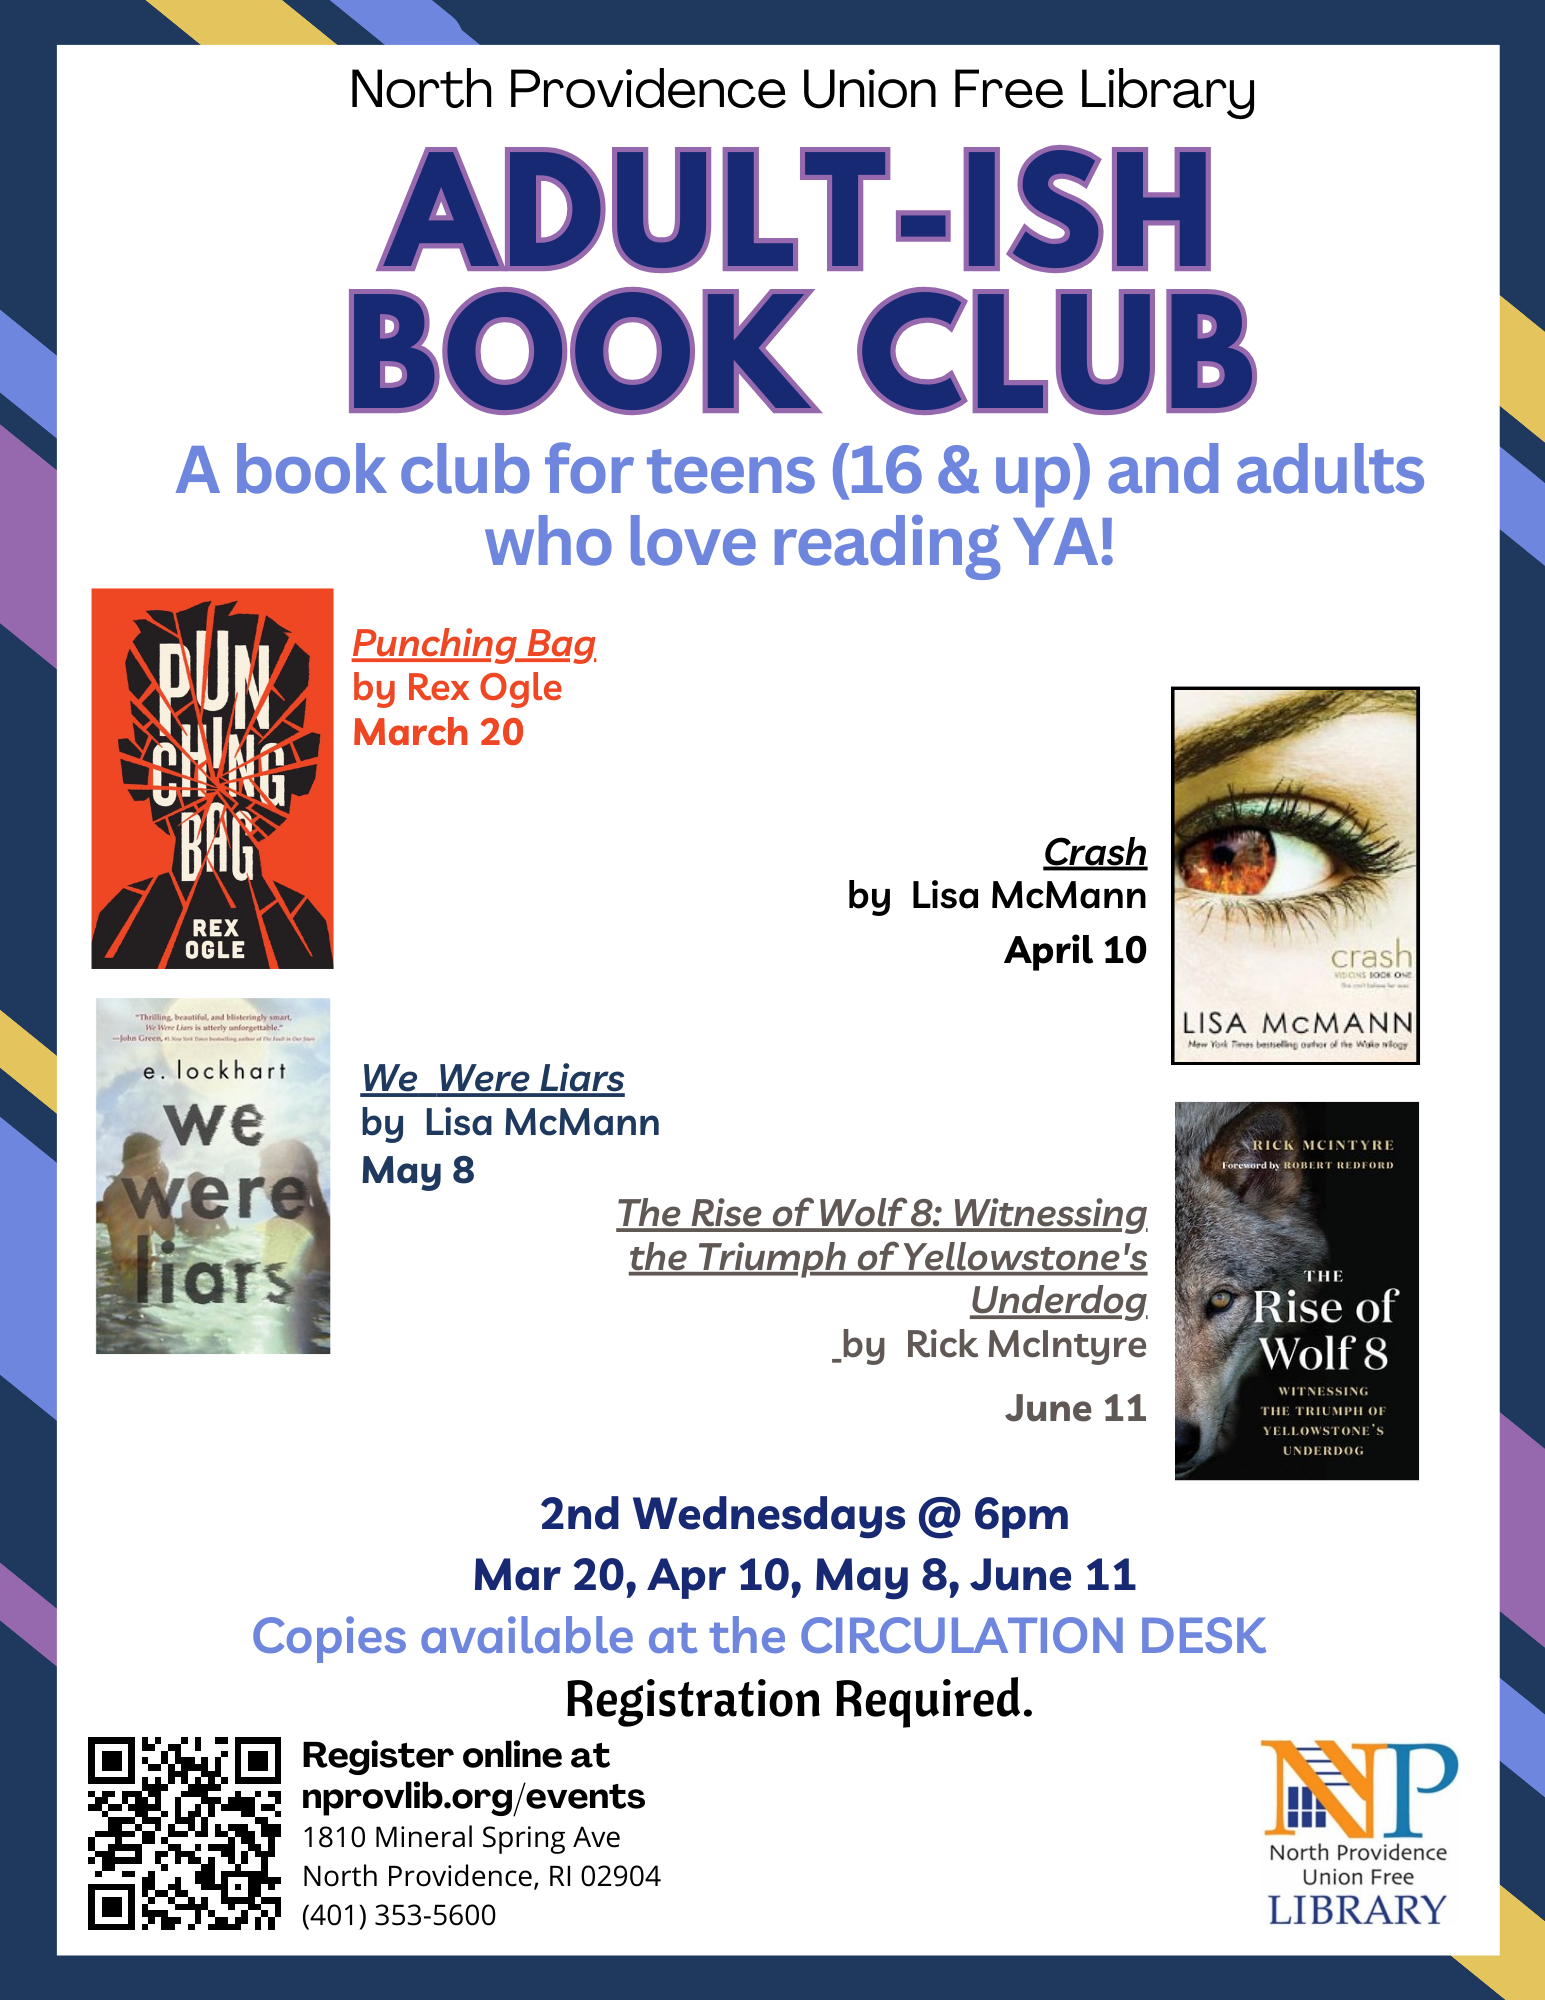 Flyer showing upcoming dates for Adultish Book Club.